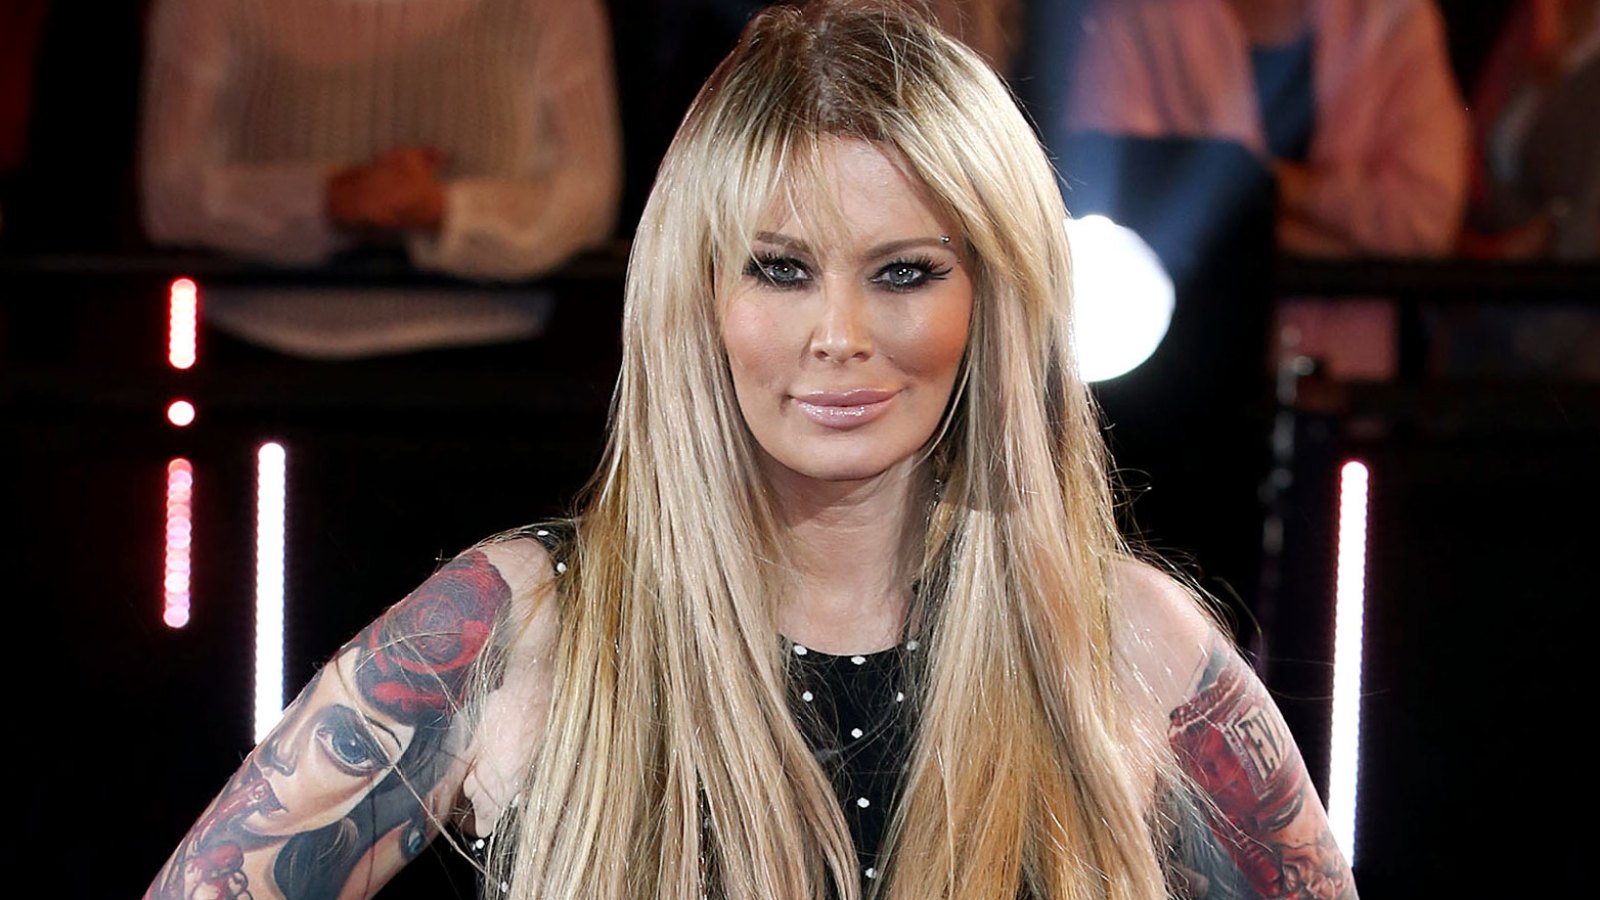 Jenna Jameson Drops 10 Pounds After Returning to Keto Diet